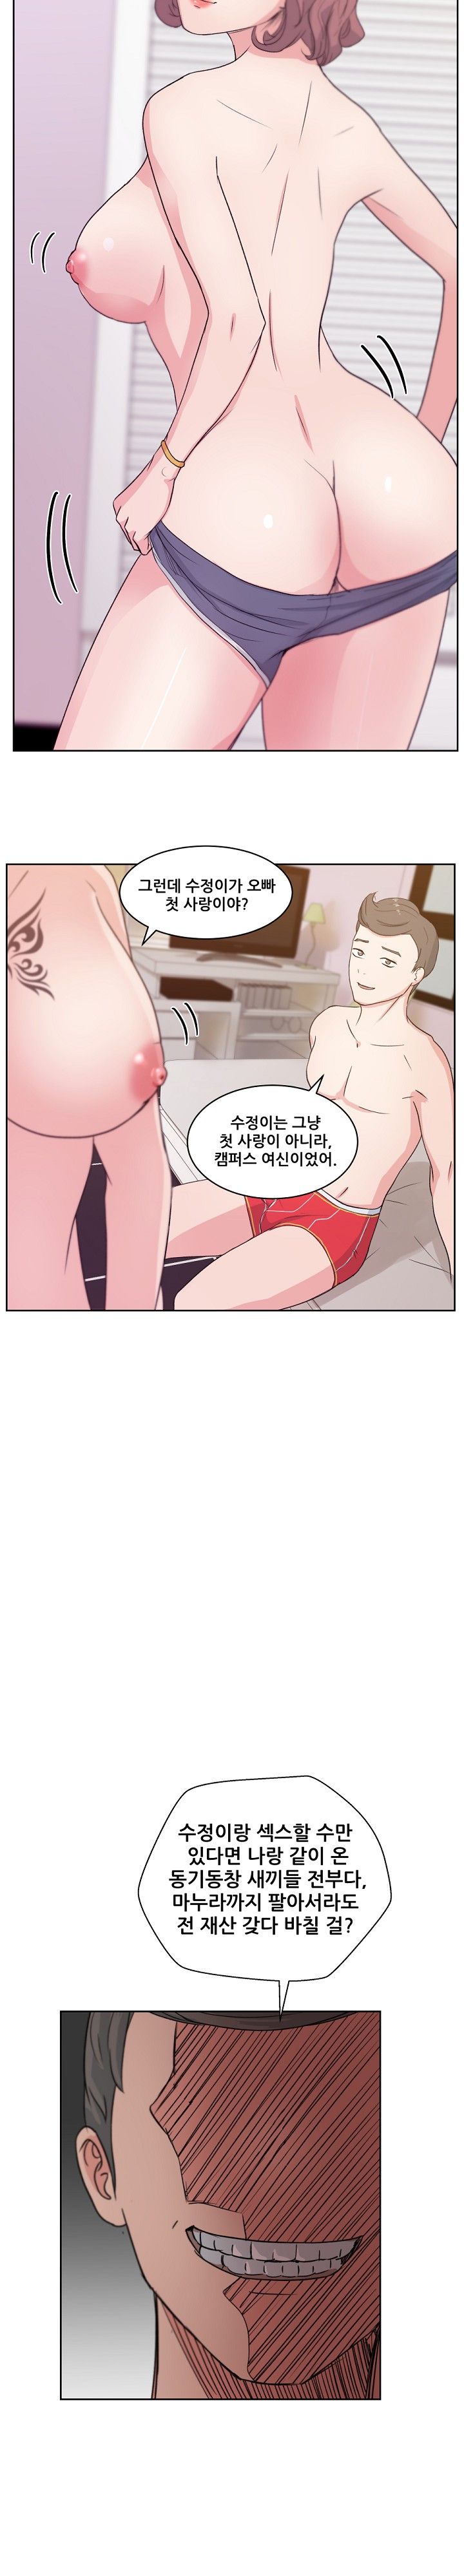 Sooyung Comic Shop Raw - Chapter 8 Page 5